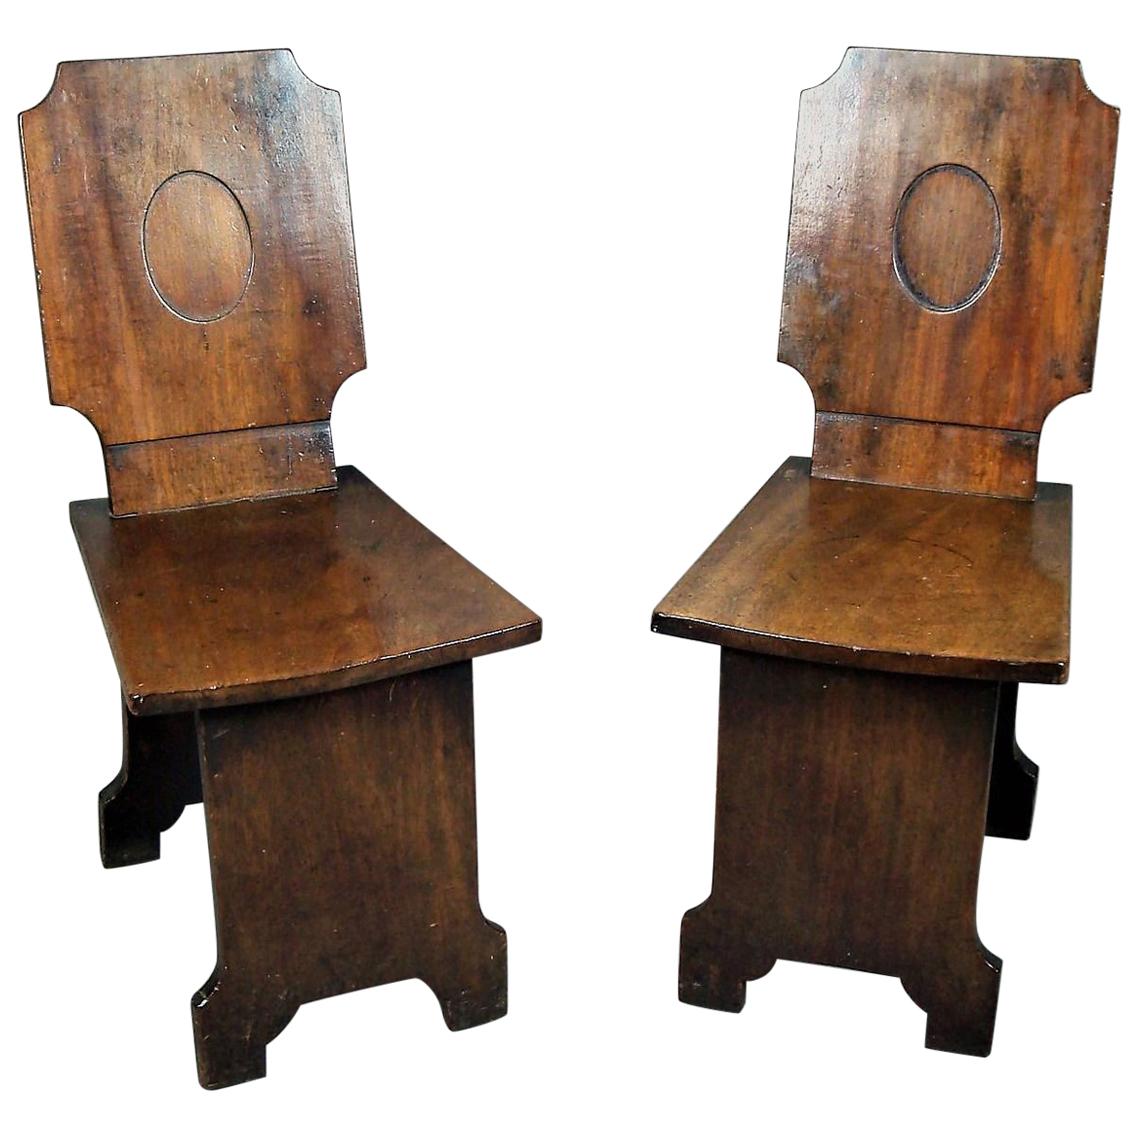 Regency Pair of Mahogany Hall Chairs Very Unusual Restrained Design For Sale